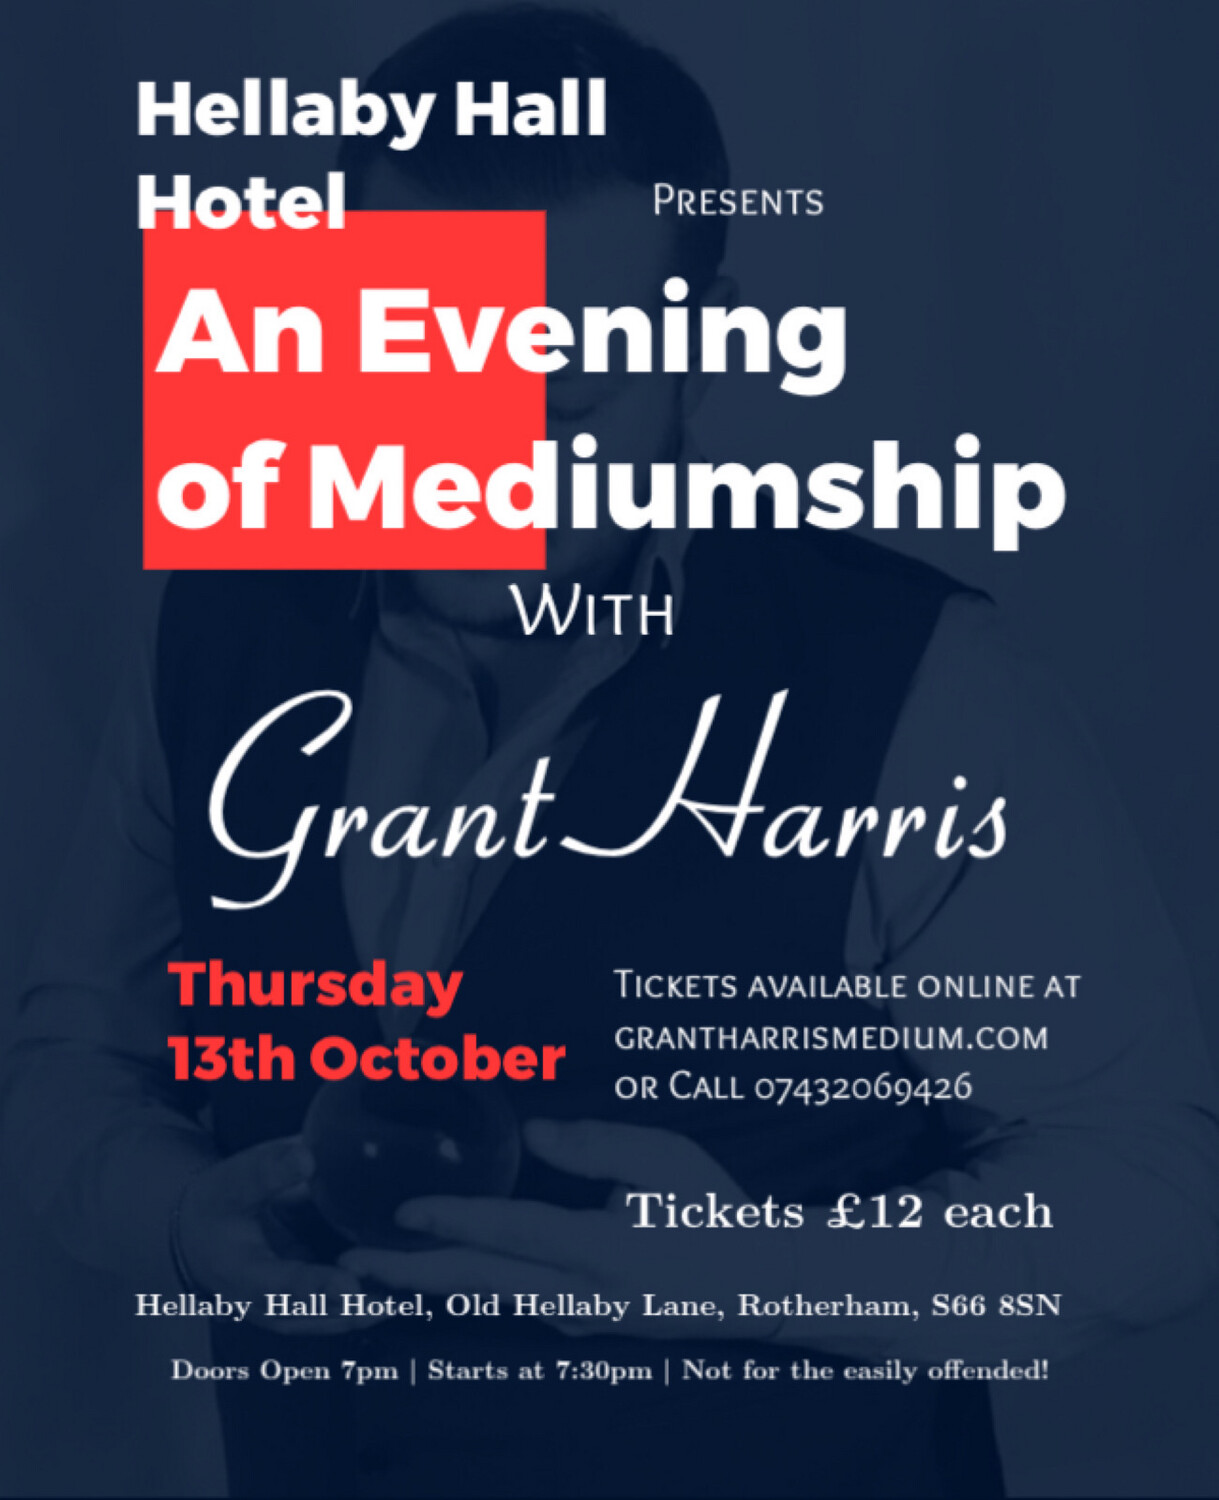 Hellaby Hall Hotel, Thu 13th October 2022